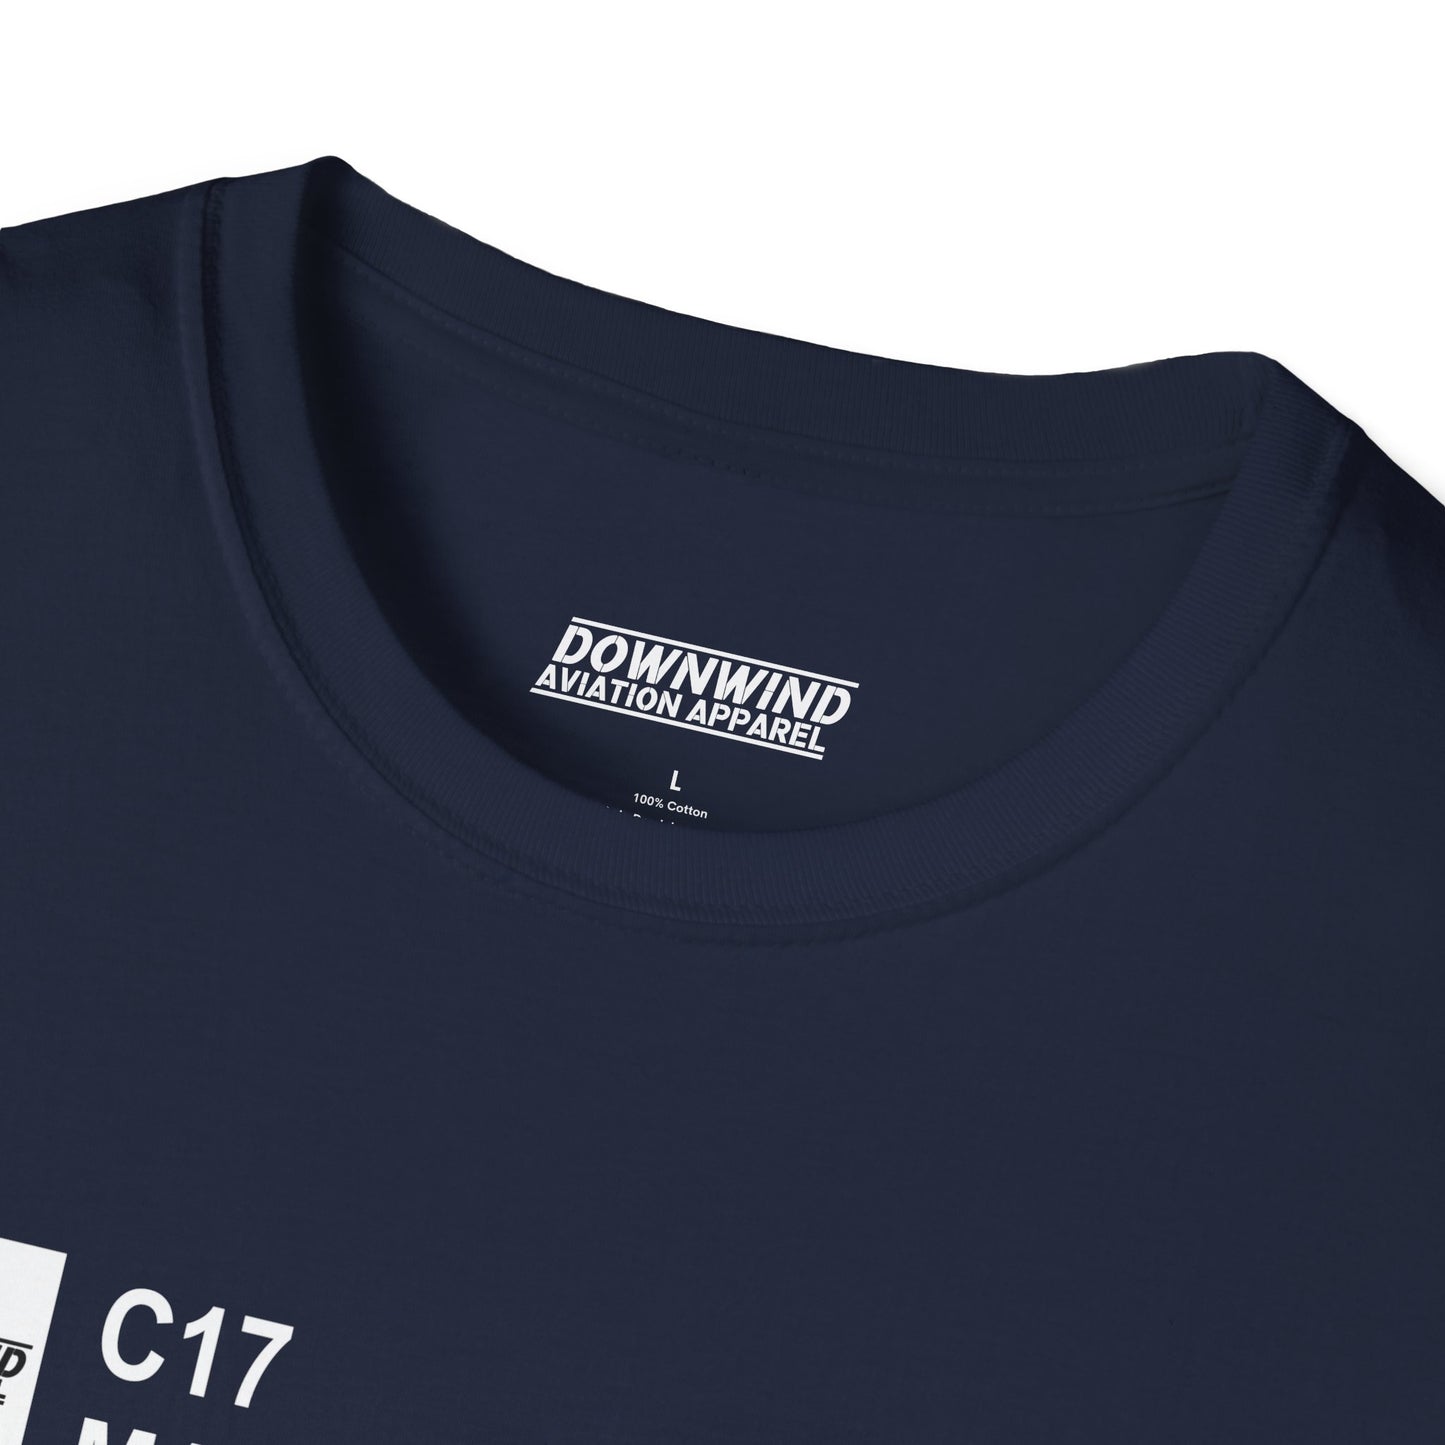 C17 / Marion Airport T-Shirt